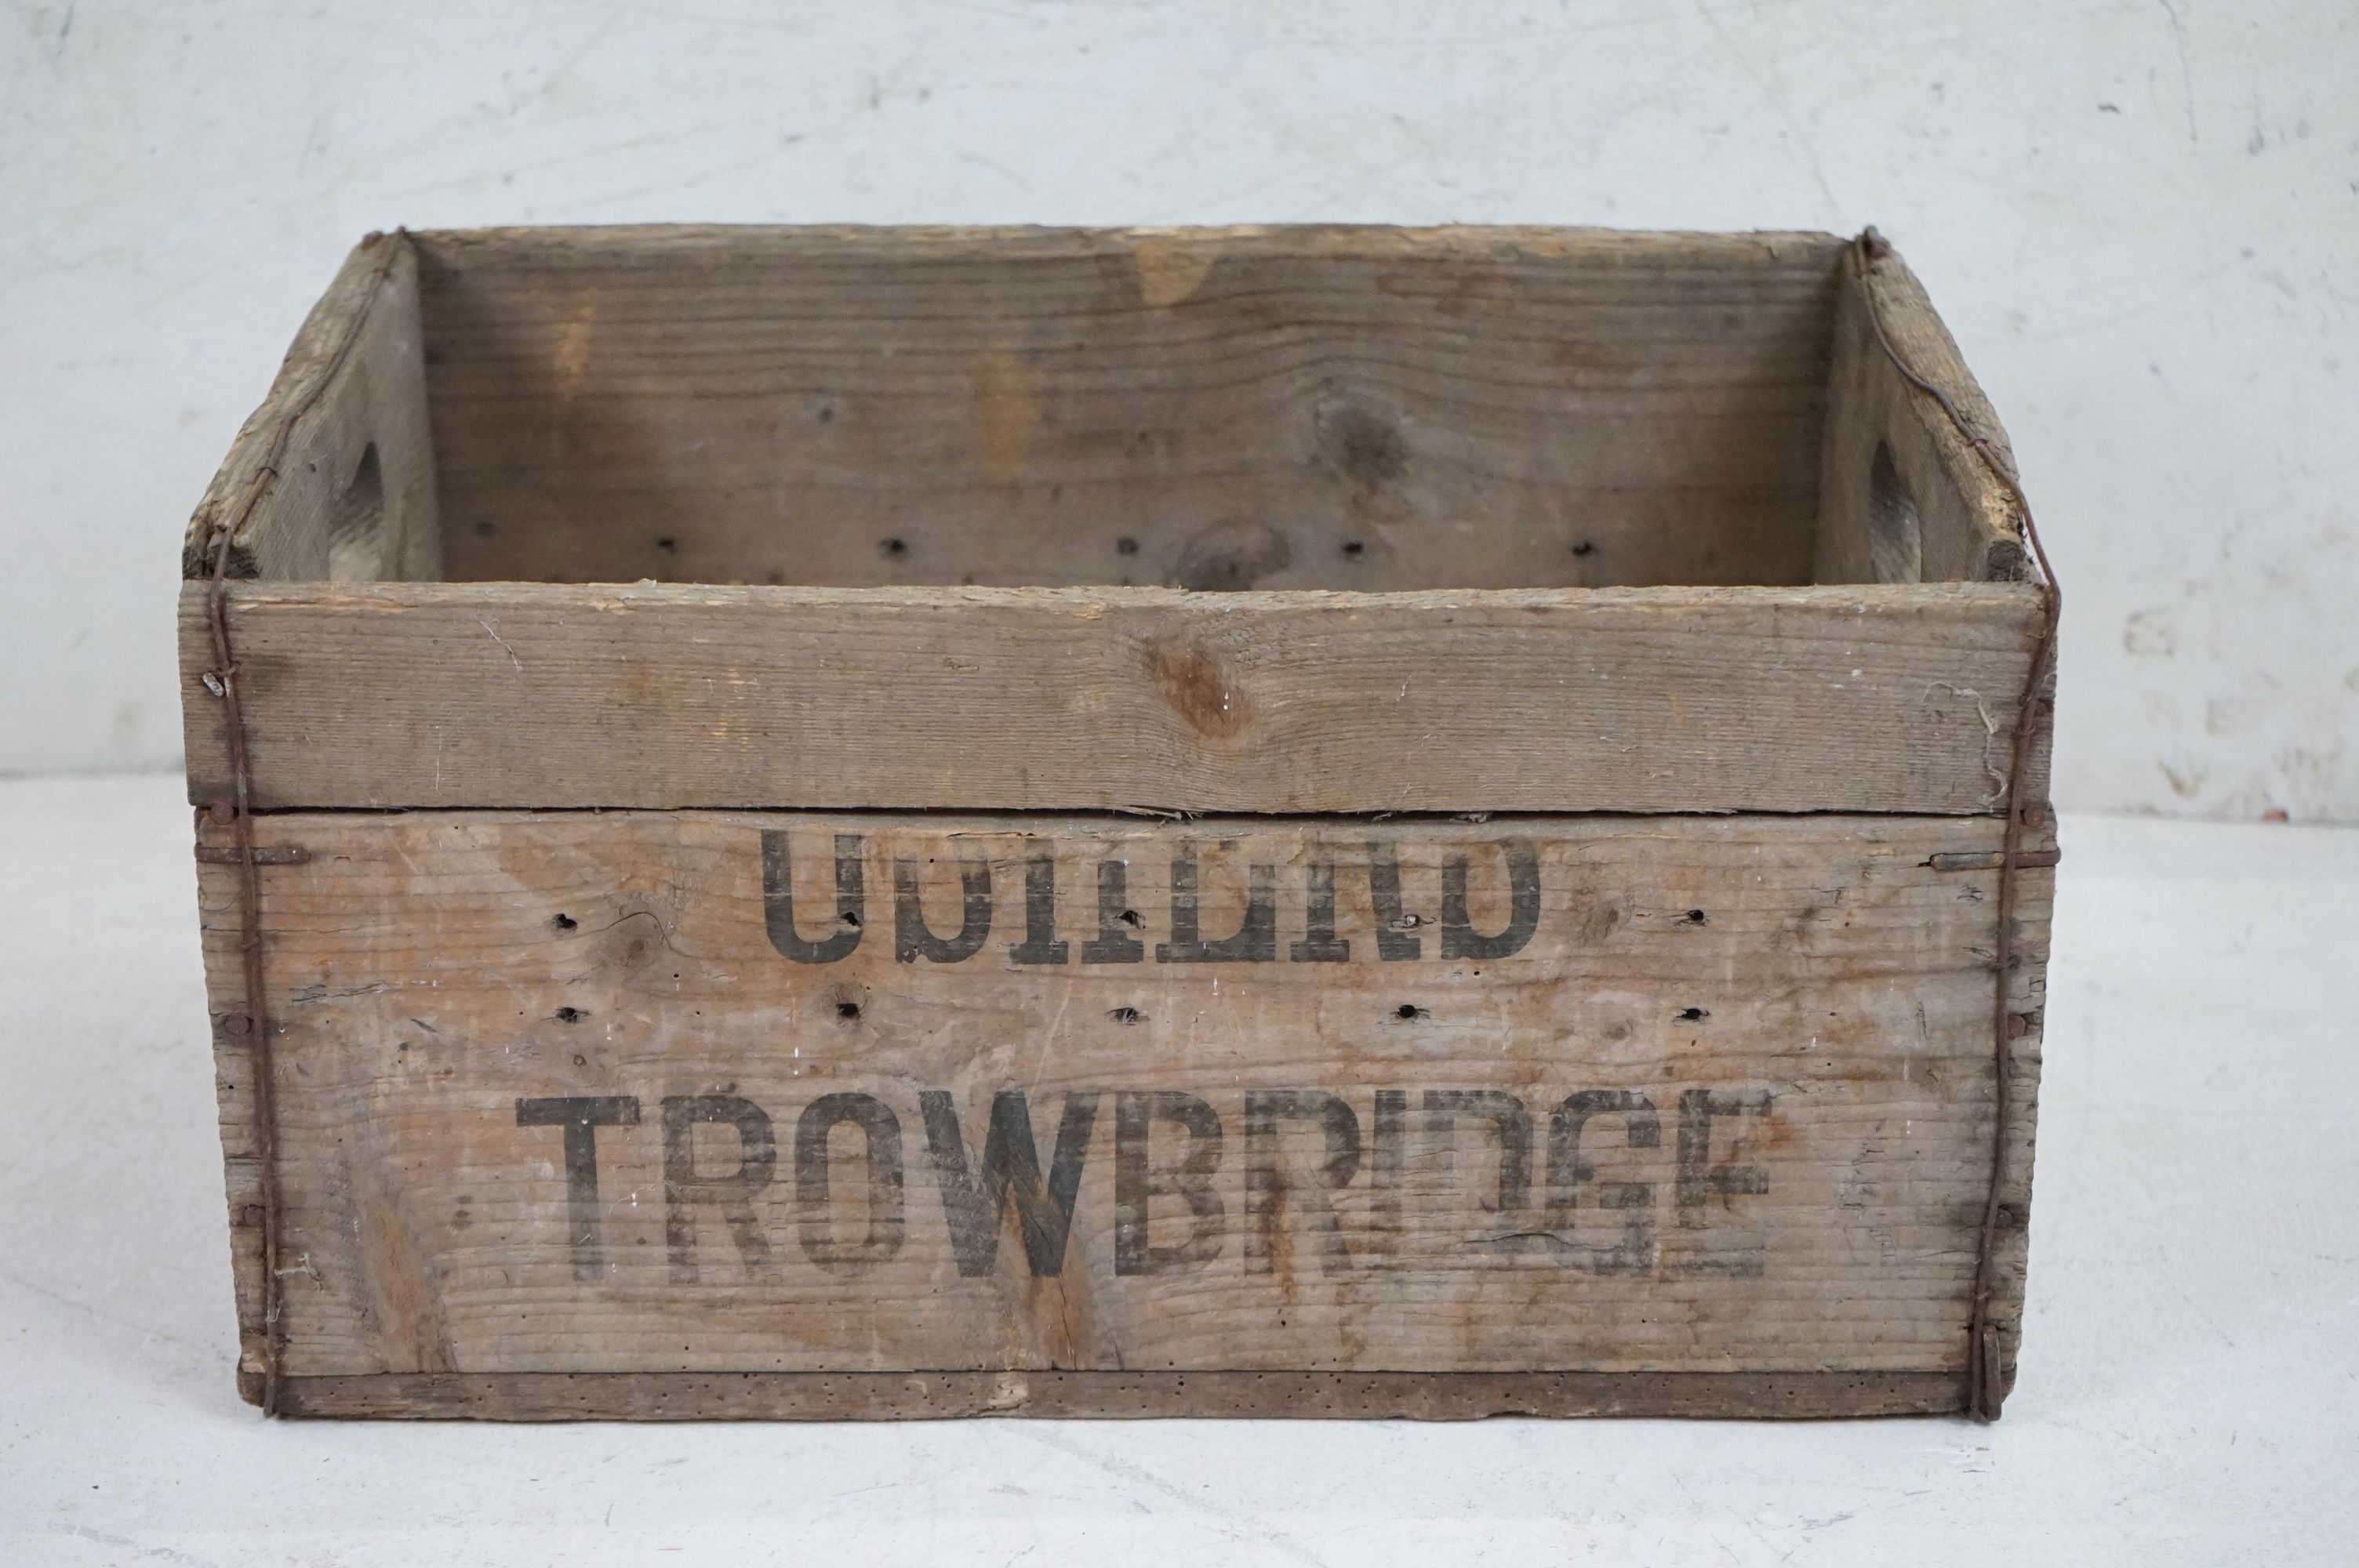 Early to Mid 20th century ' Ushers of Trowbridge ' Wooden Beer Crate, 23cm high x 44cm long